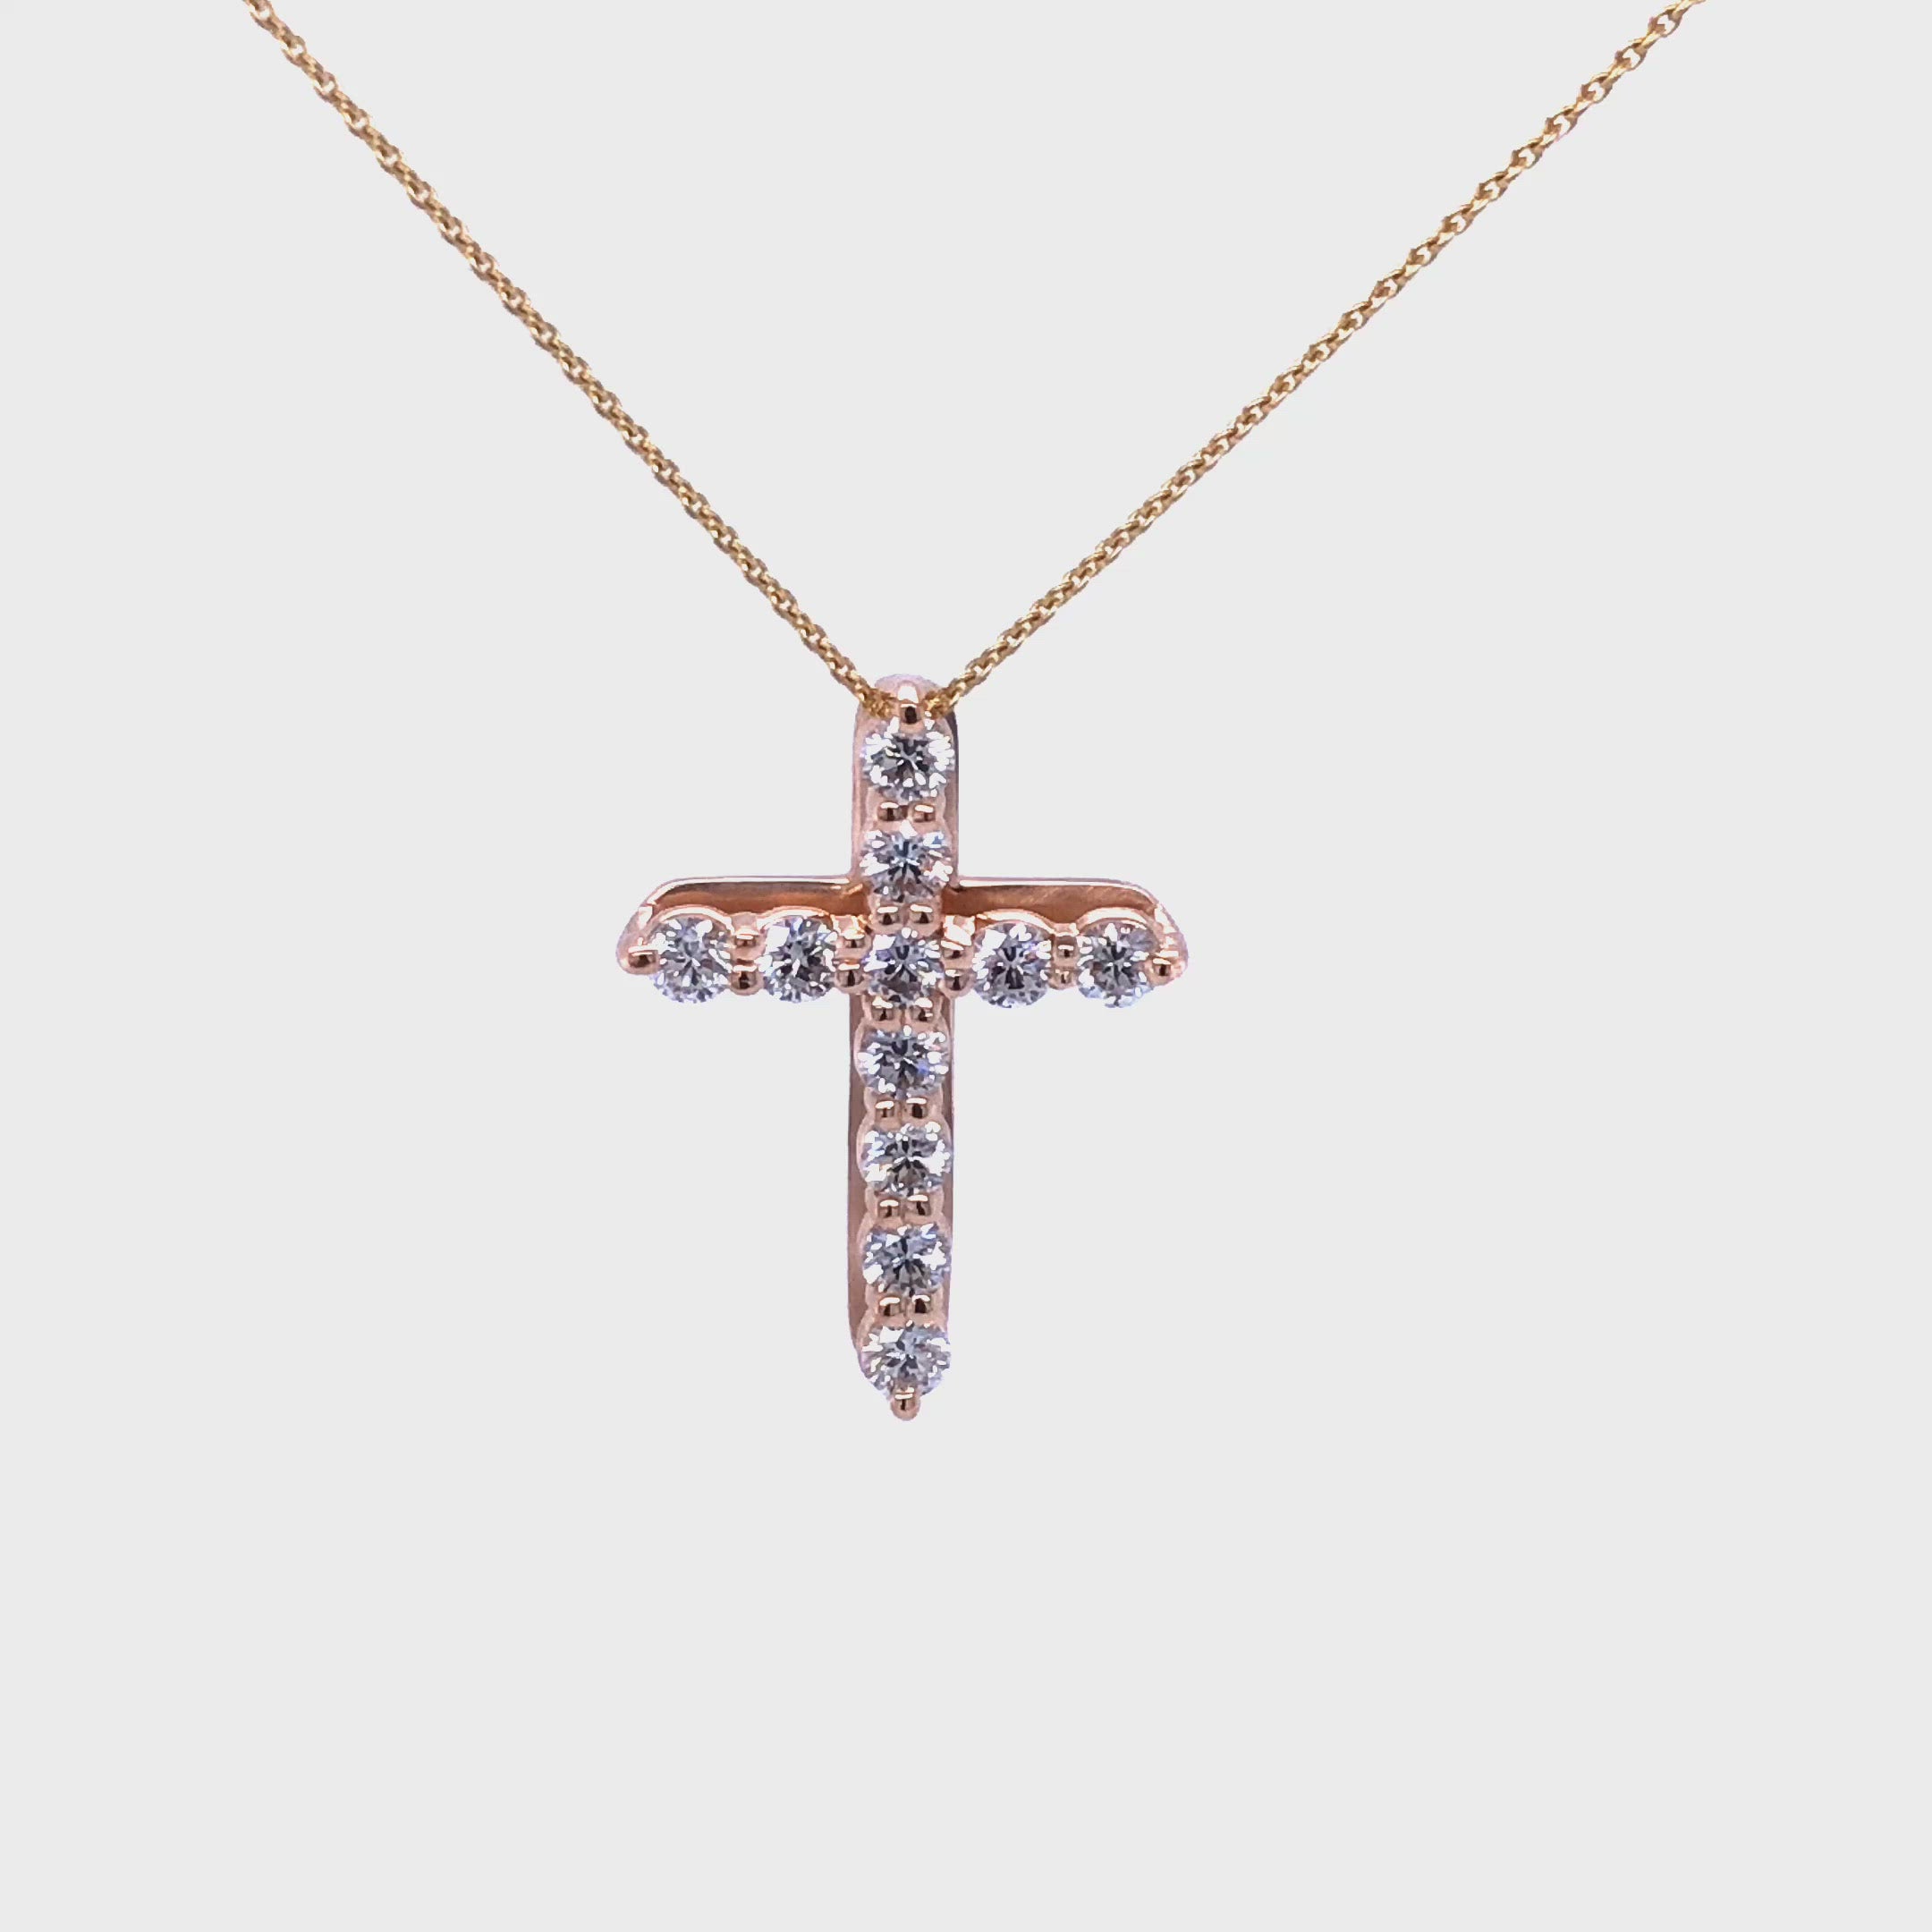 18k gold cross set with FG VS1 diamonds approximate total carat weight 0.68 on a 18 inch with 16 inch extension 18k gold cable chain